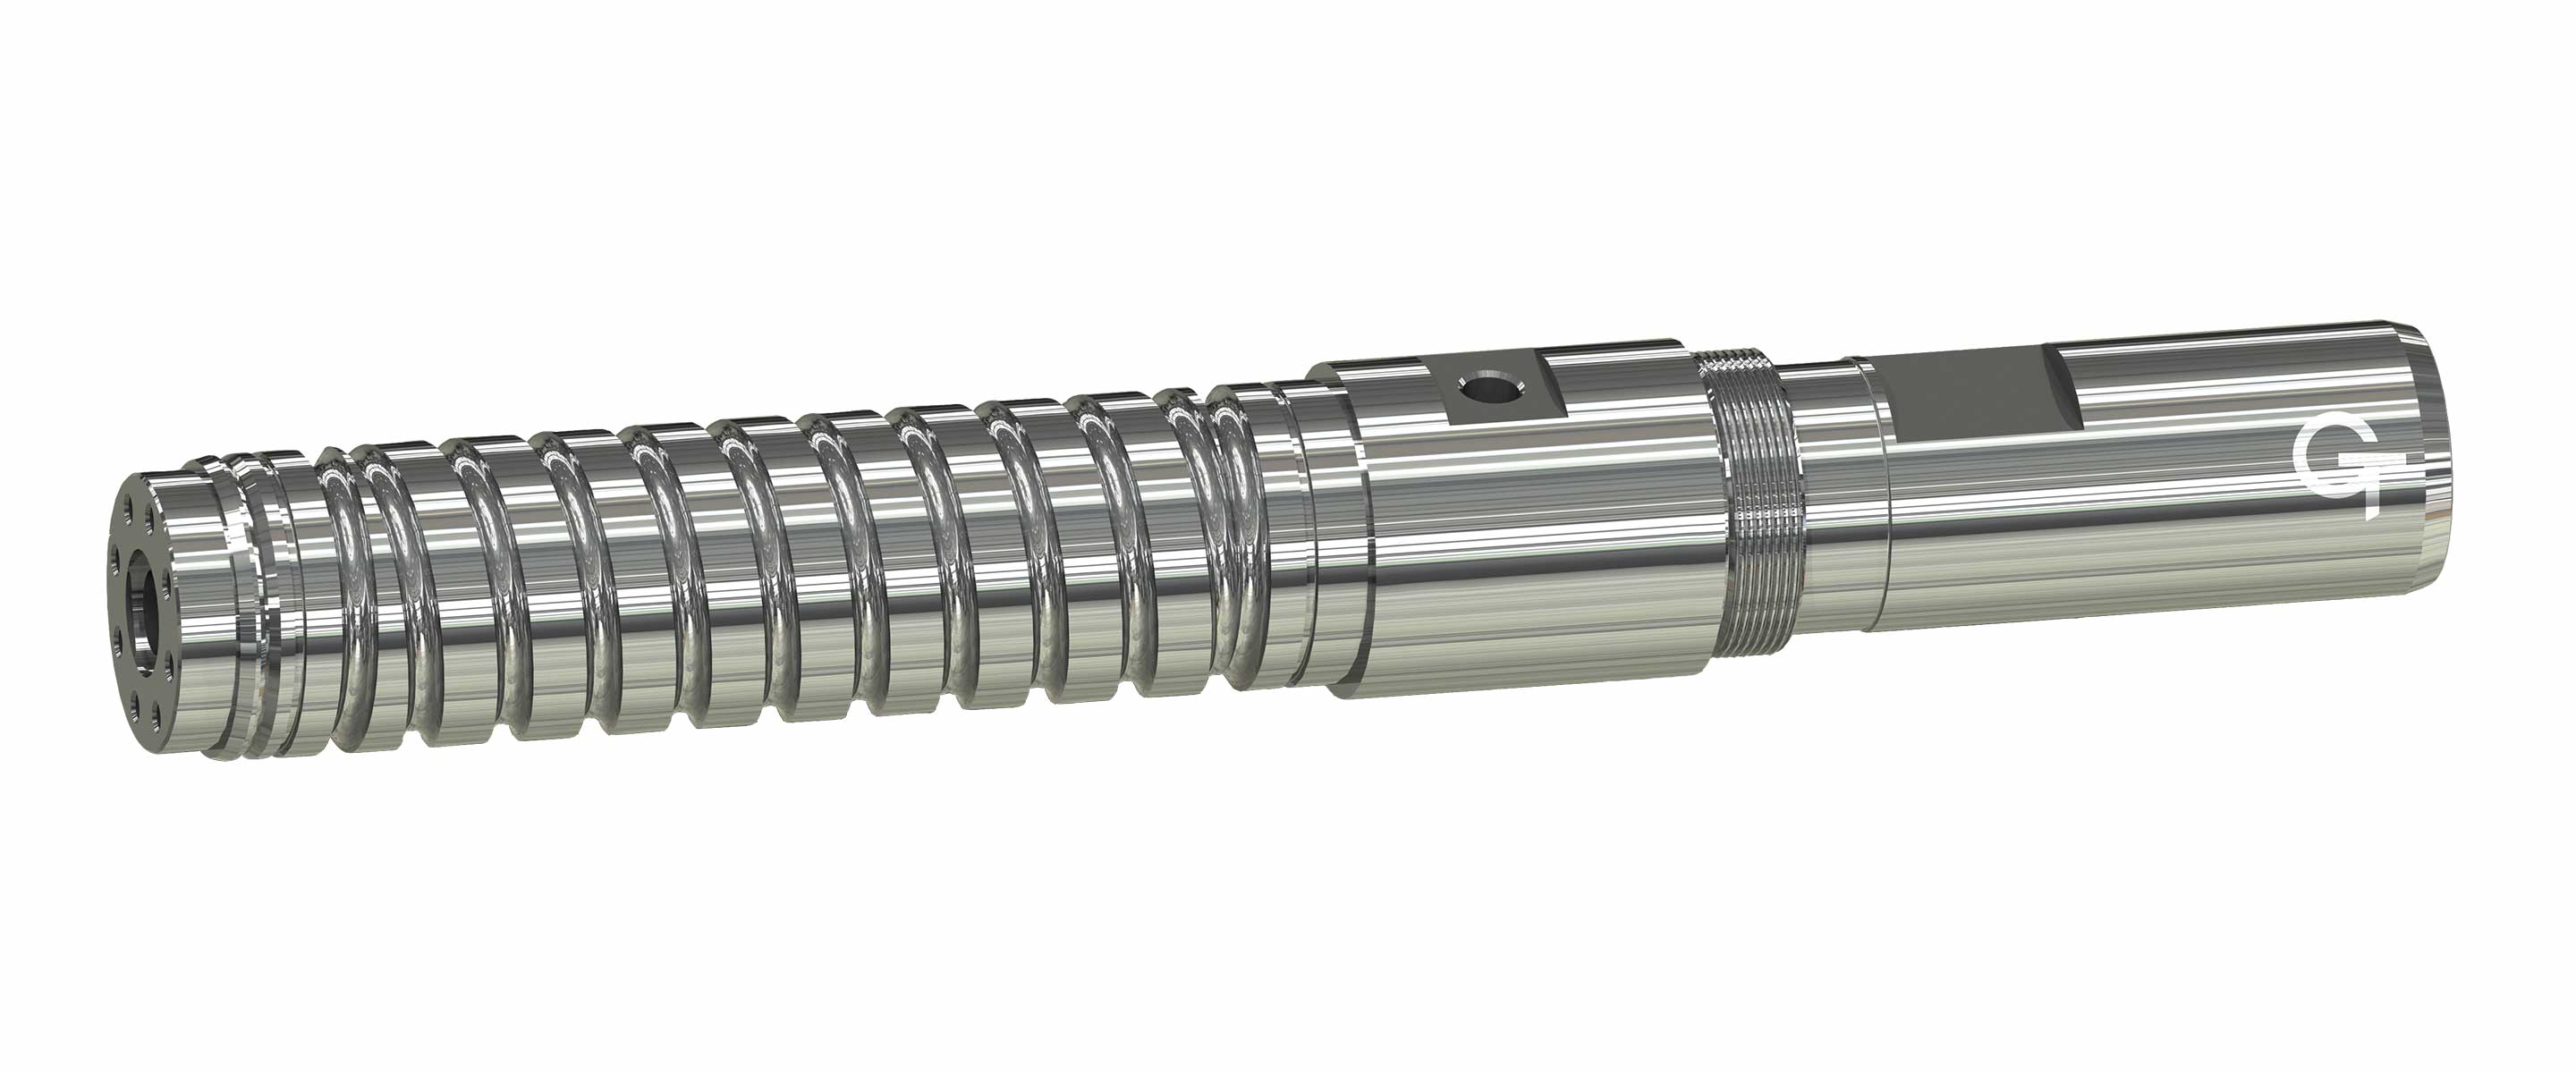 The LSR barrel is produced of bimetal with a cooling zone.